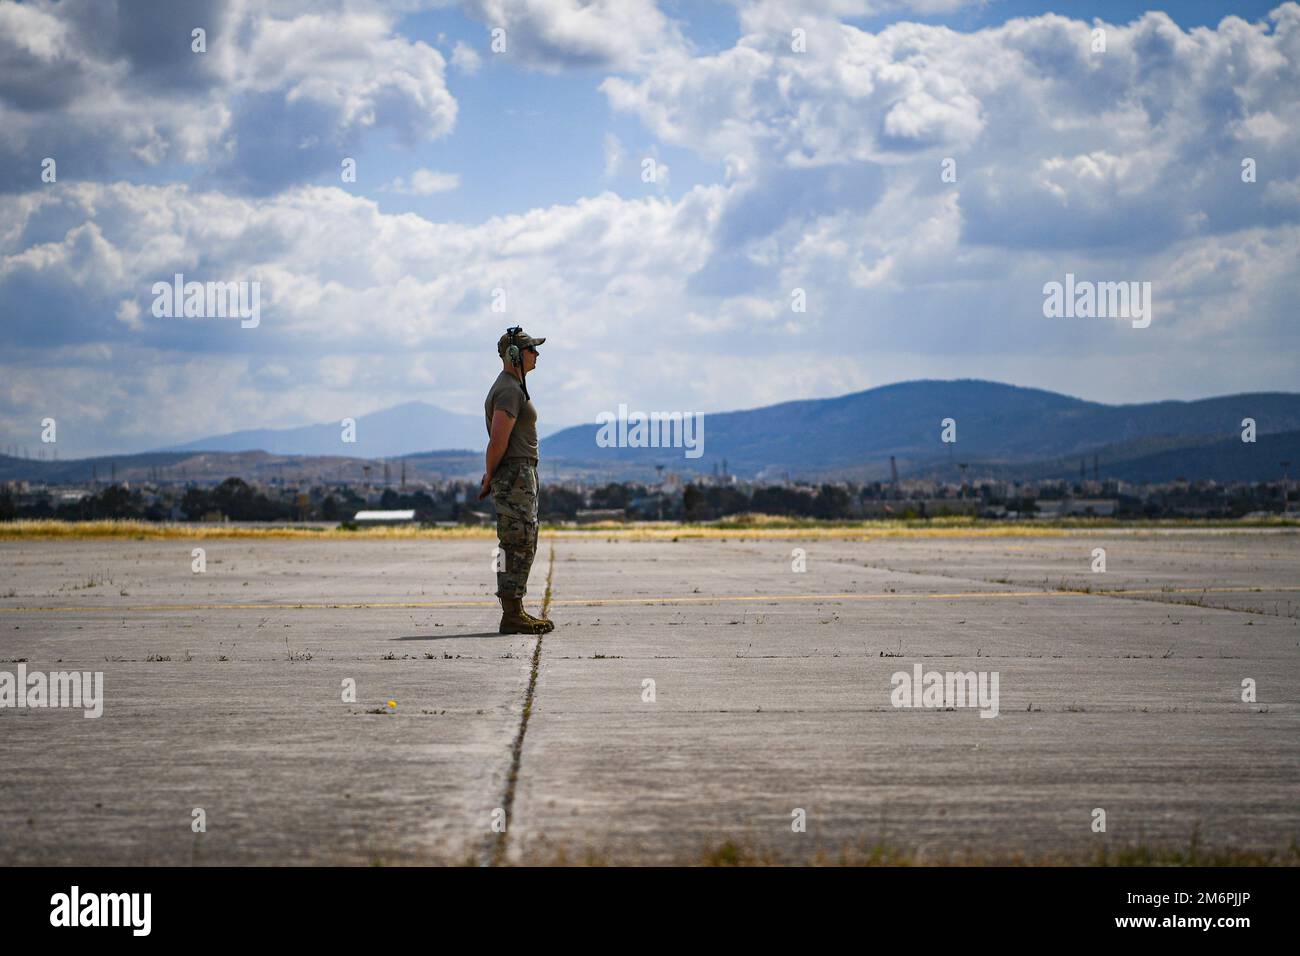 U.S. Air Force Staff Sgt. John Dockery, 86th Aircraft Maintenance Squadron flying crew chief, prepares to guide a U.S. Air Force C-130J Super Hercules aircraft during Exercise Stolen Cerberus IX at Elefsina Air Base, Greece, May 11, 2022. Airmen from the 86th Airlift Wing, Ramstein Air Base, Germany, and personnel assigned to the 435th Air Ground Operations Wing. Stock Photo